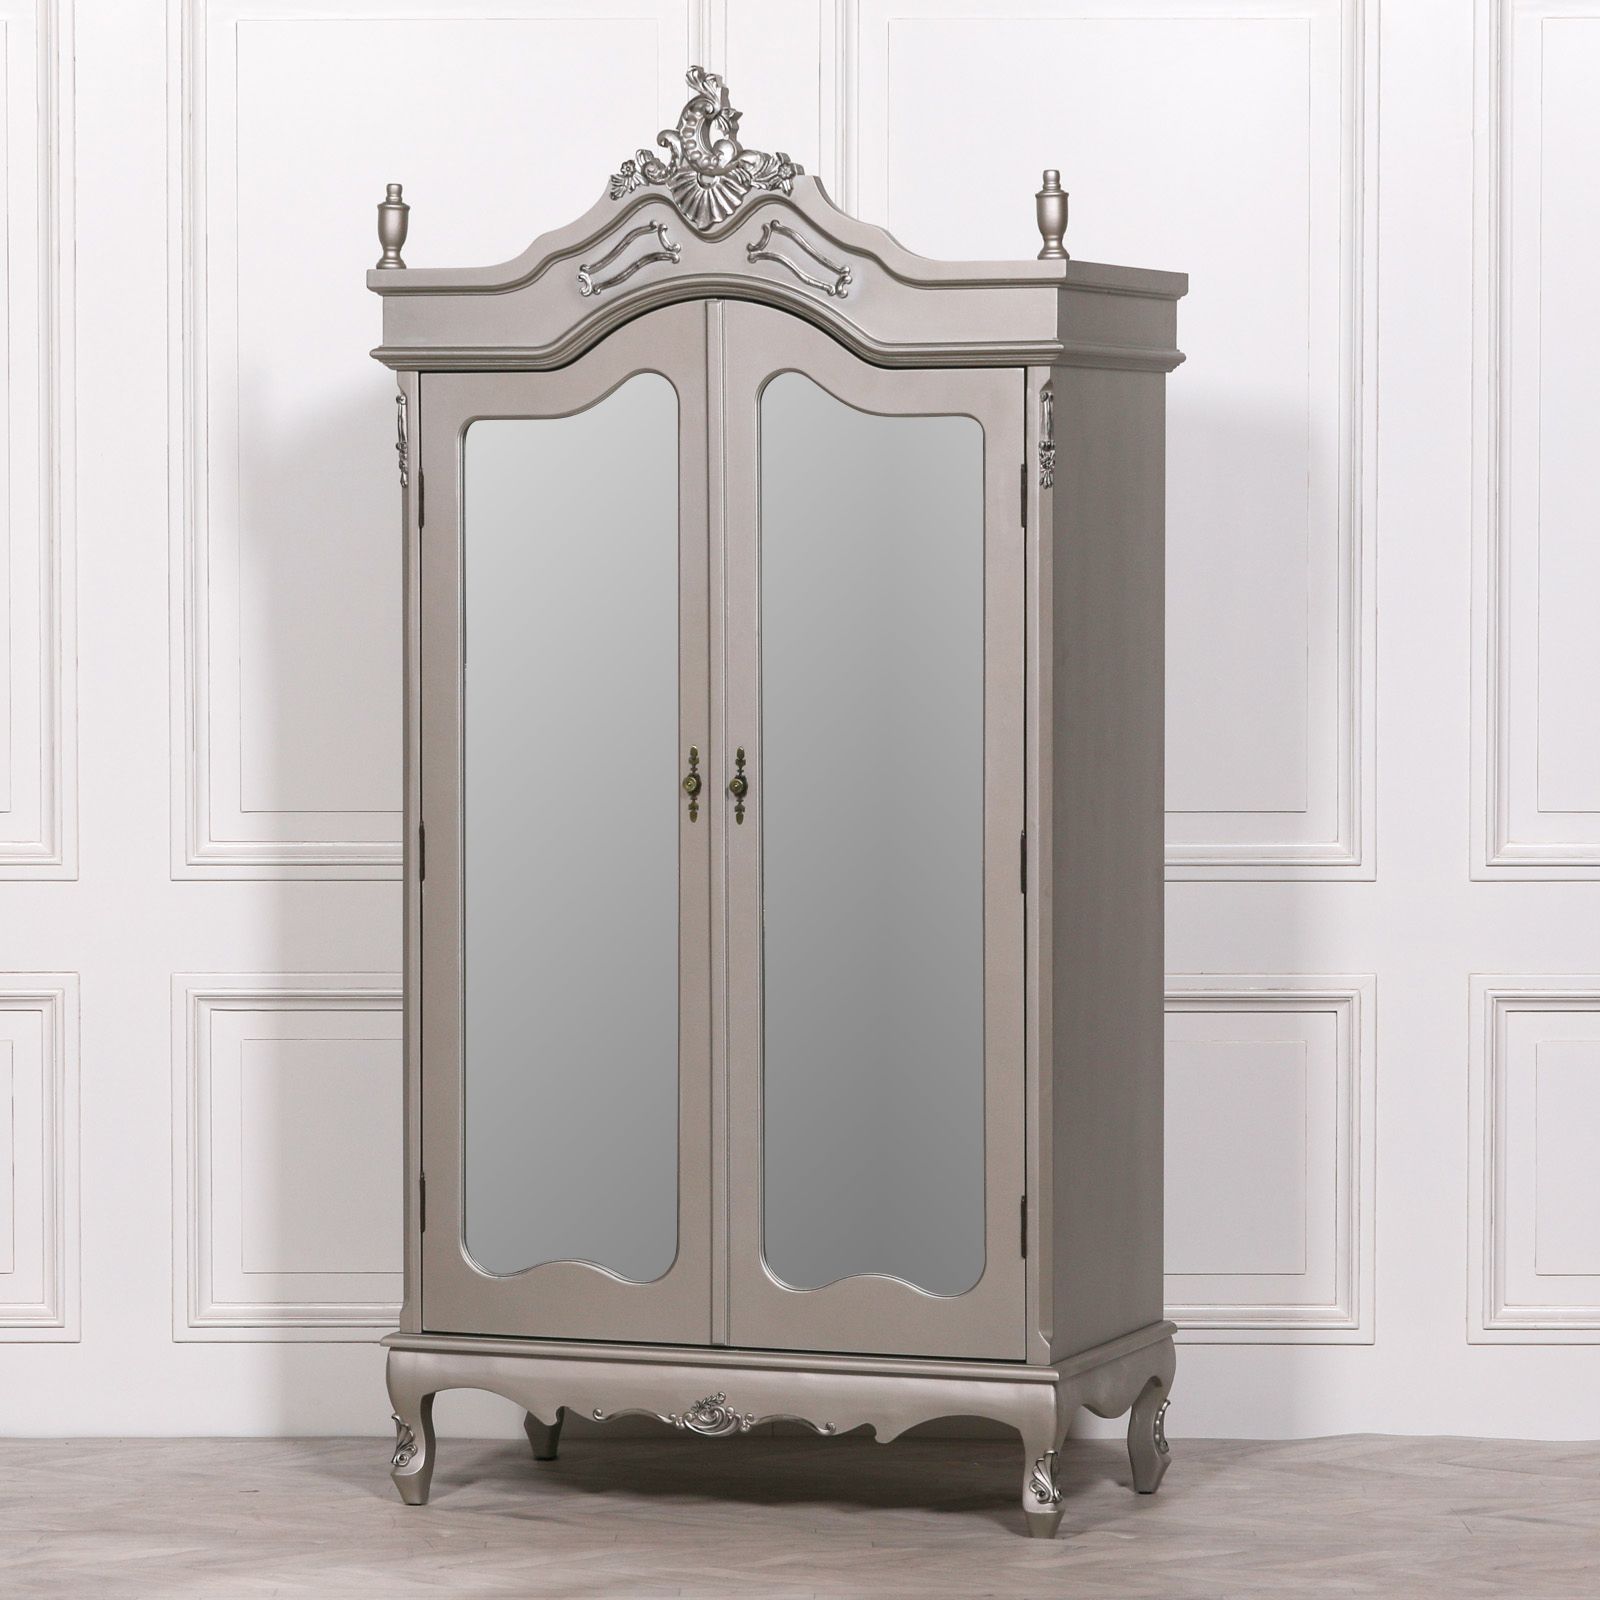 French Style Double Armoire Silver Wardrobe Mirrored Doors Within French Armoire Wardrobes (View 17 of 20)